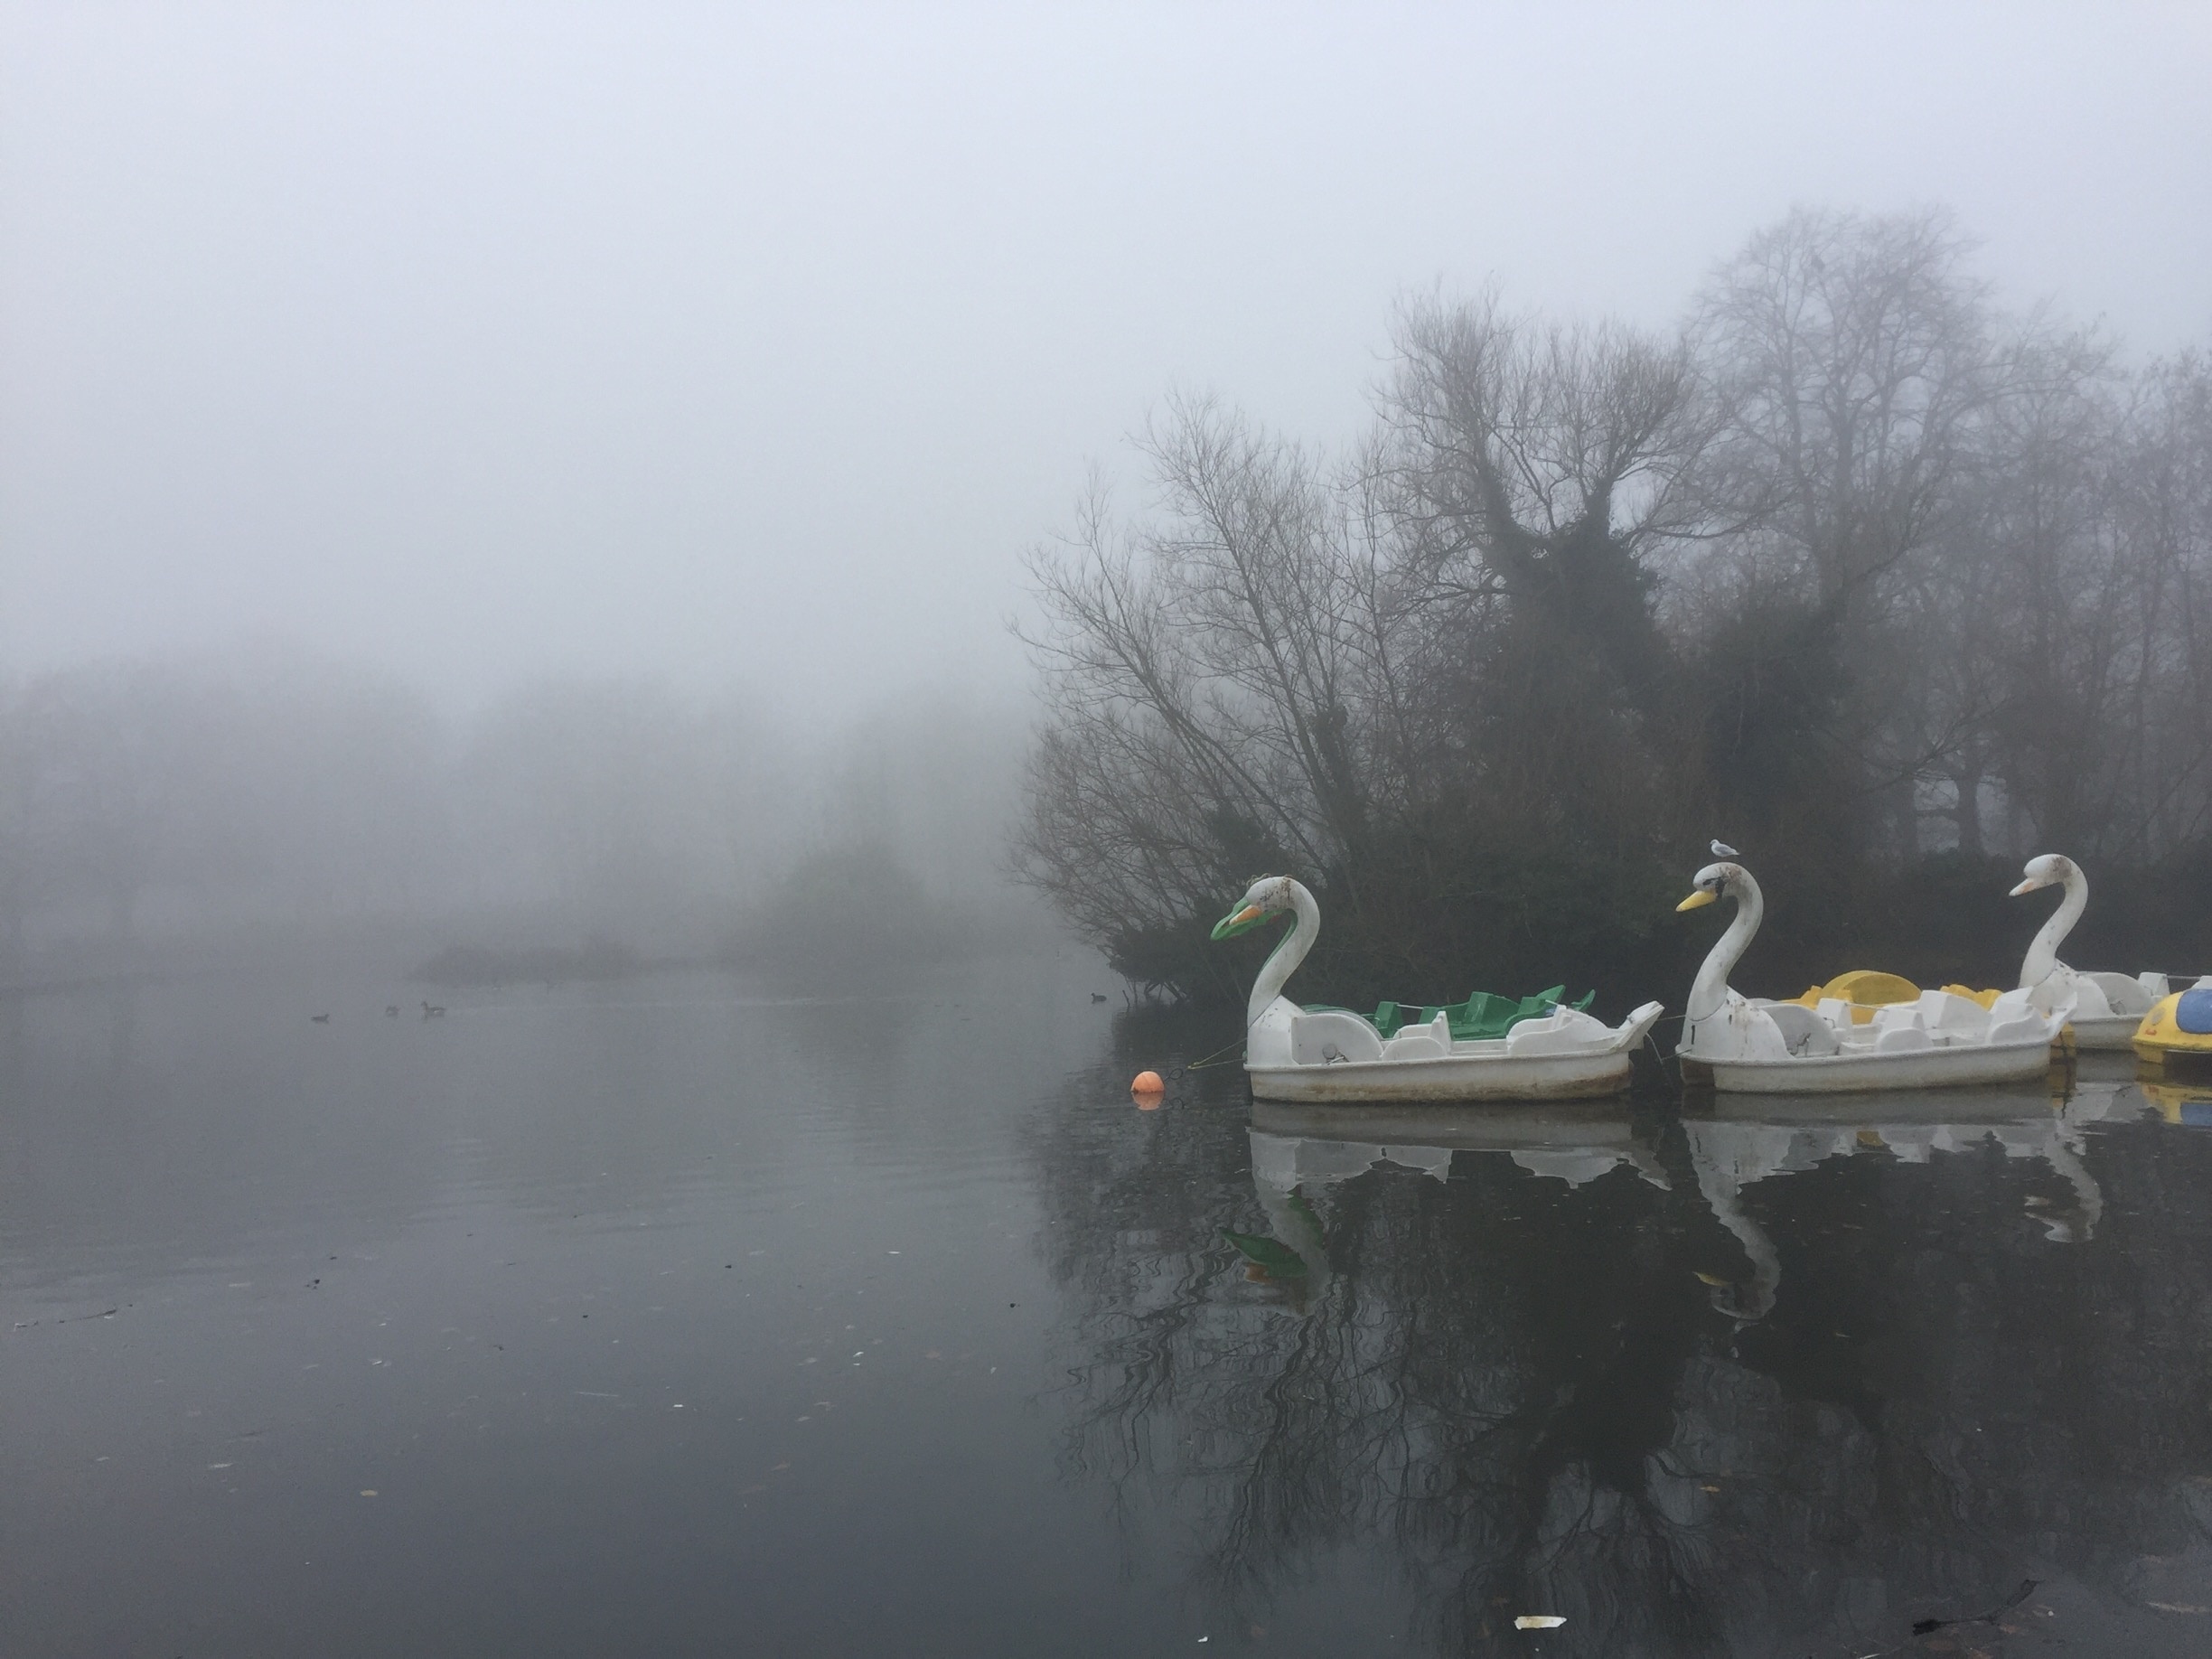 Swan boats in the fog #lifeatexpedia